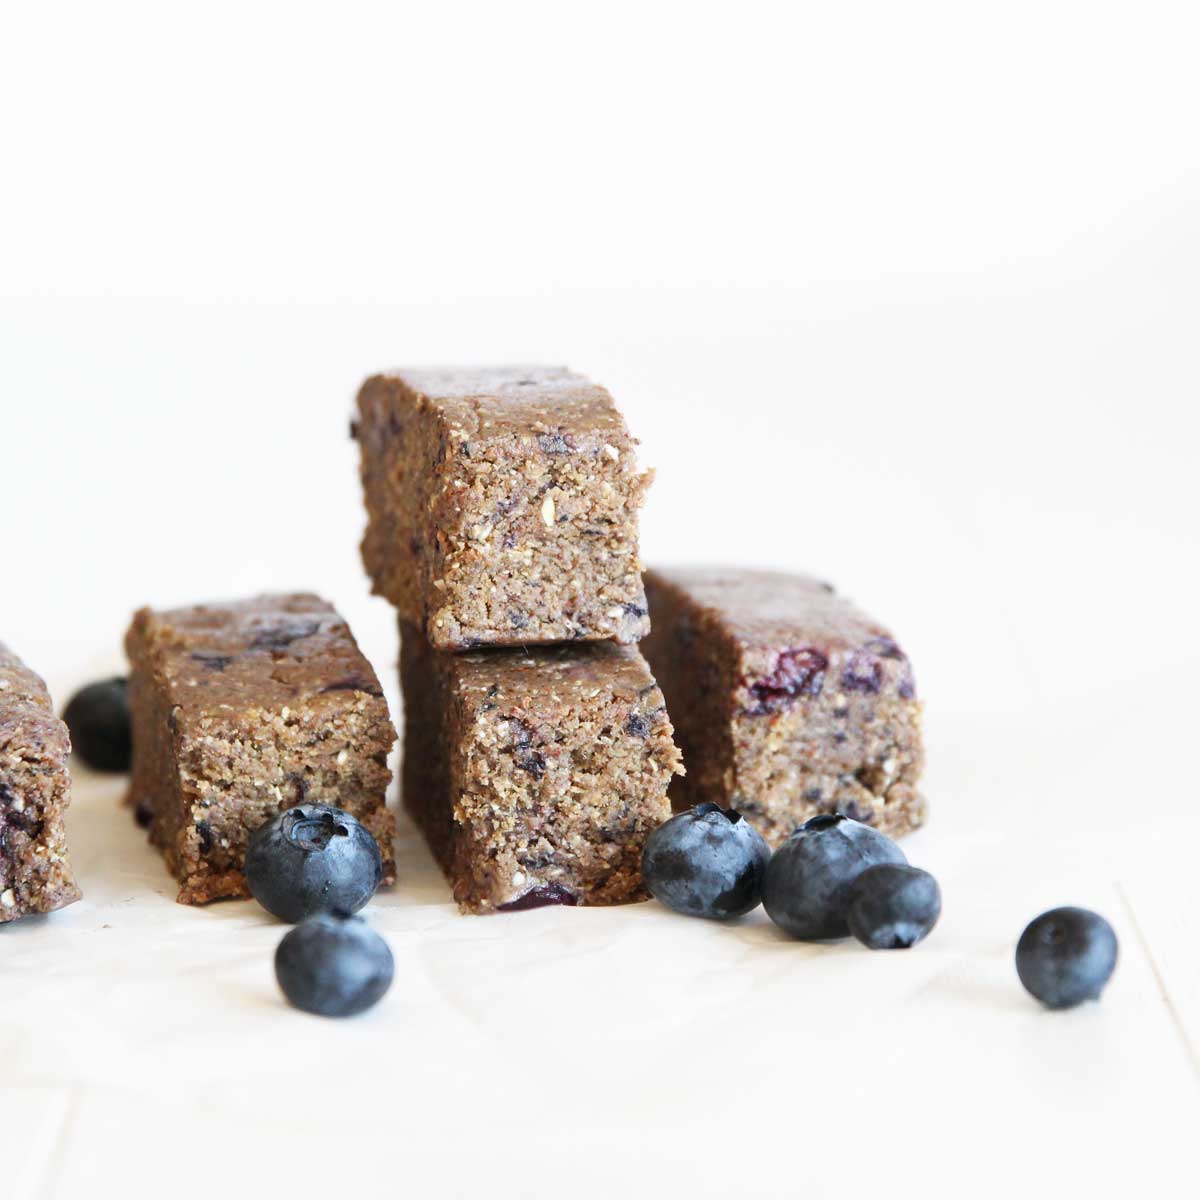 Homemade Blueberry Oatmeal Protein Bars (Healthy, Wholesome Vegan Recipe!) - naan pizza